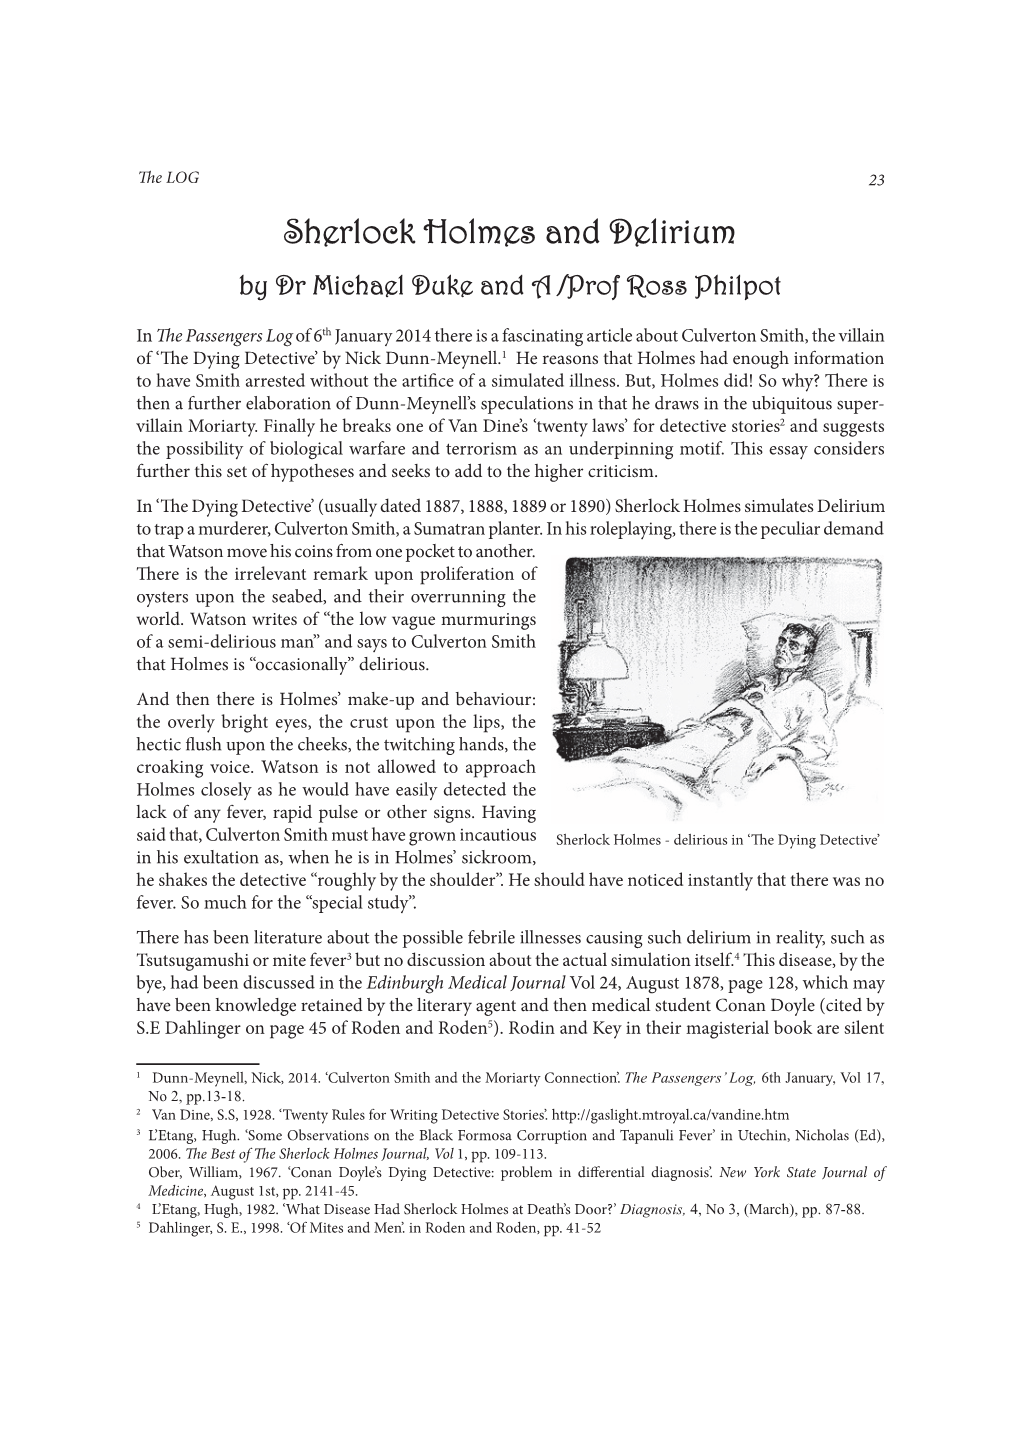 Sherlock Holmes and Delirium by Dr Michael Duke and a /Prof Ross Philpot